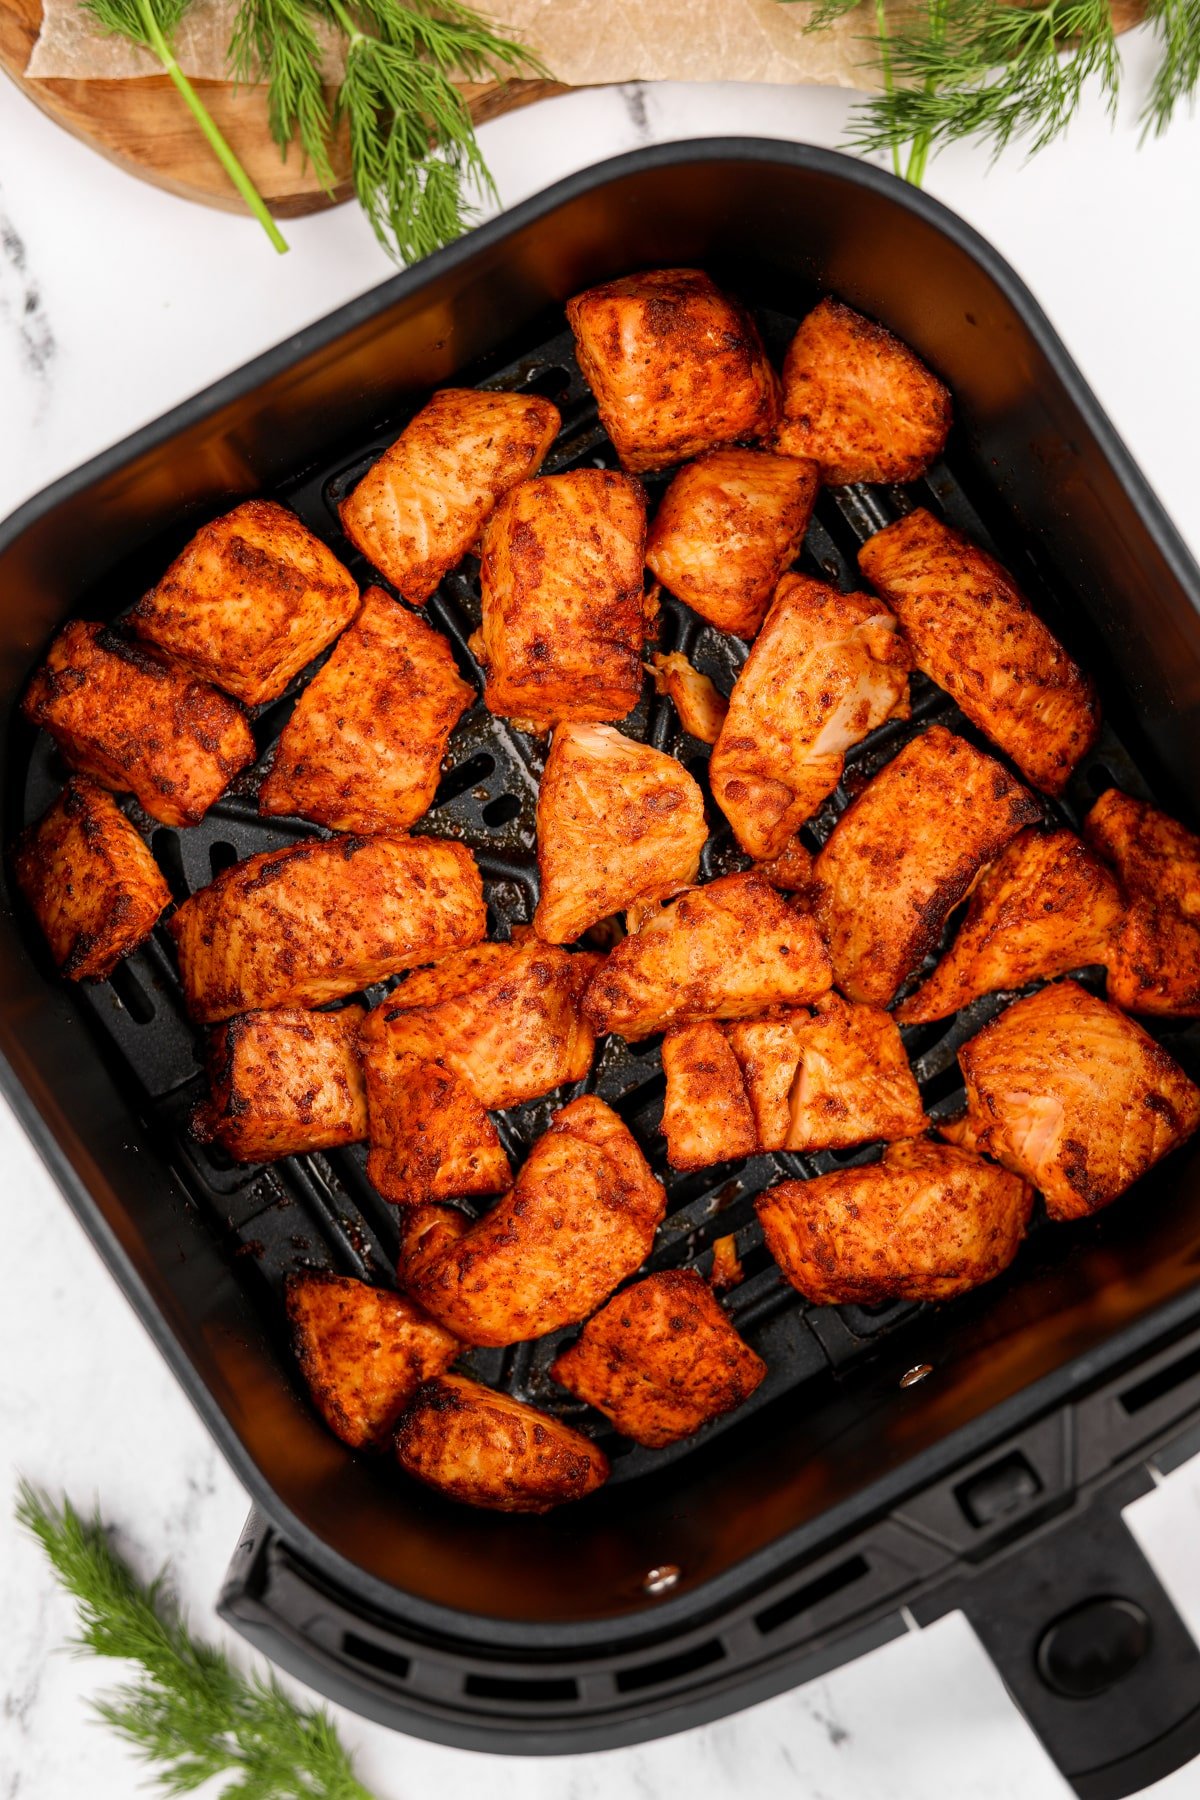 An air fryer basket filled with cubed and cooked salmon.